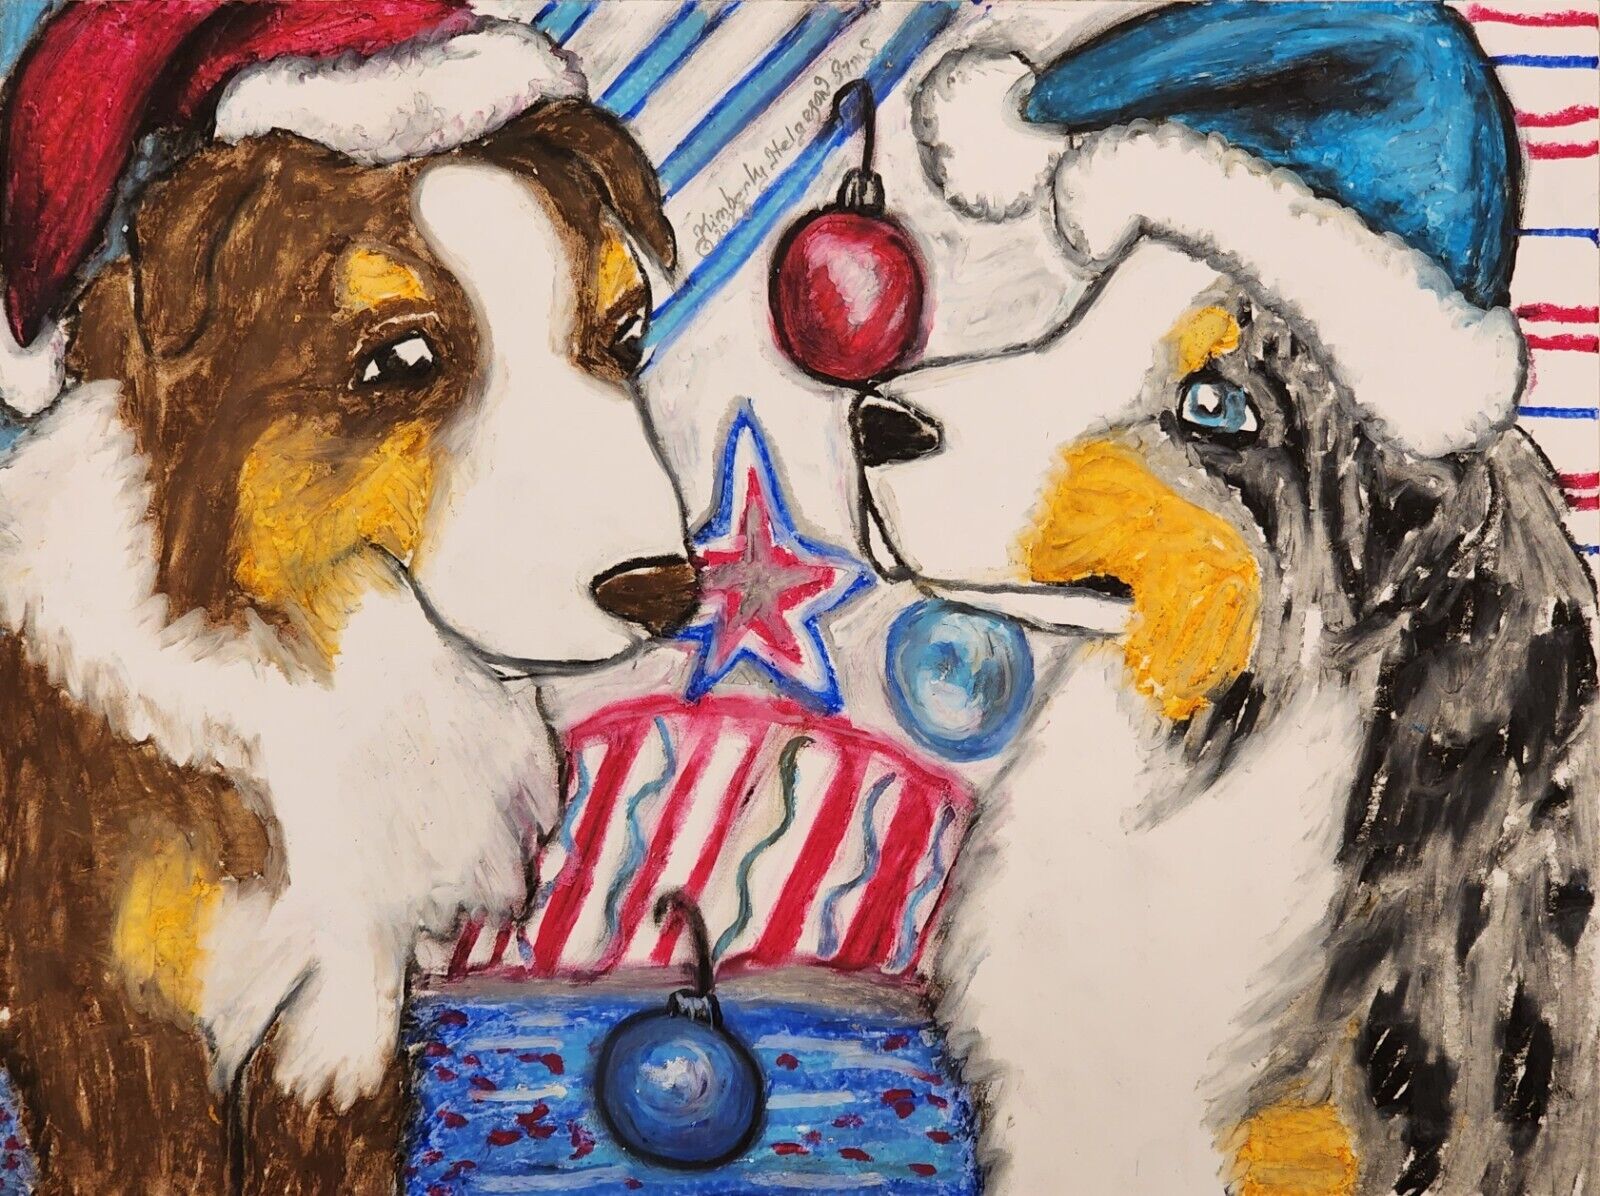 Mini Aussie Christmas 4x6 Art Print from Painting | Gifts, Home Decor Dogs